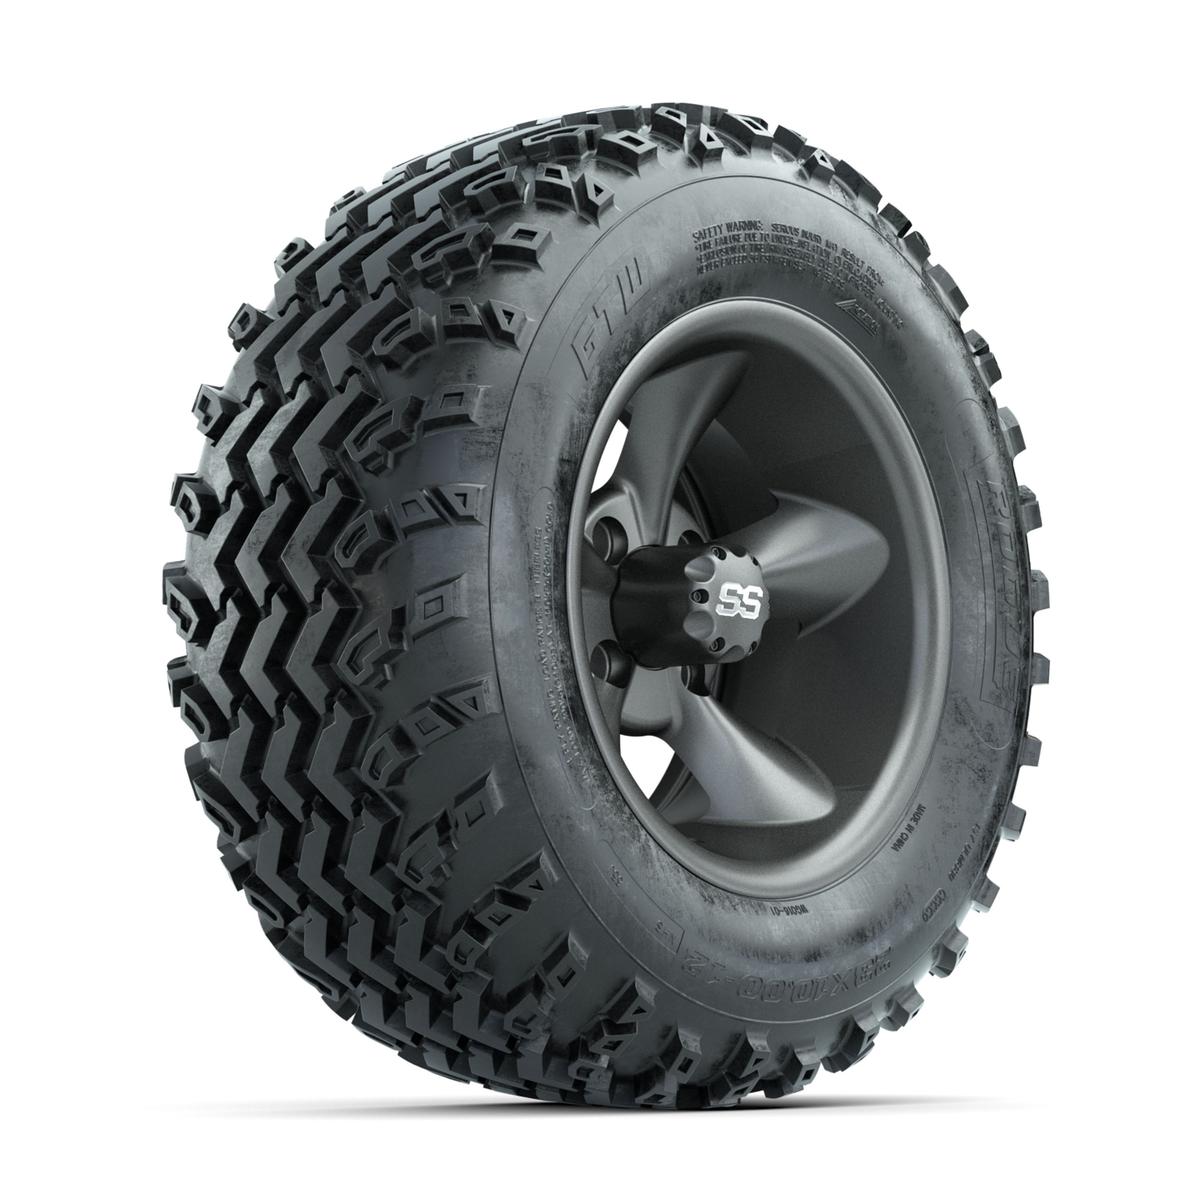 GTW Stellar Machined/Black 12 in Wheels with 23x10.00-12 Rogue All Terrain Tires – Full Set